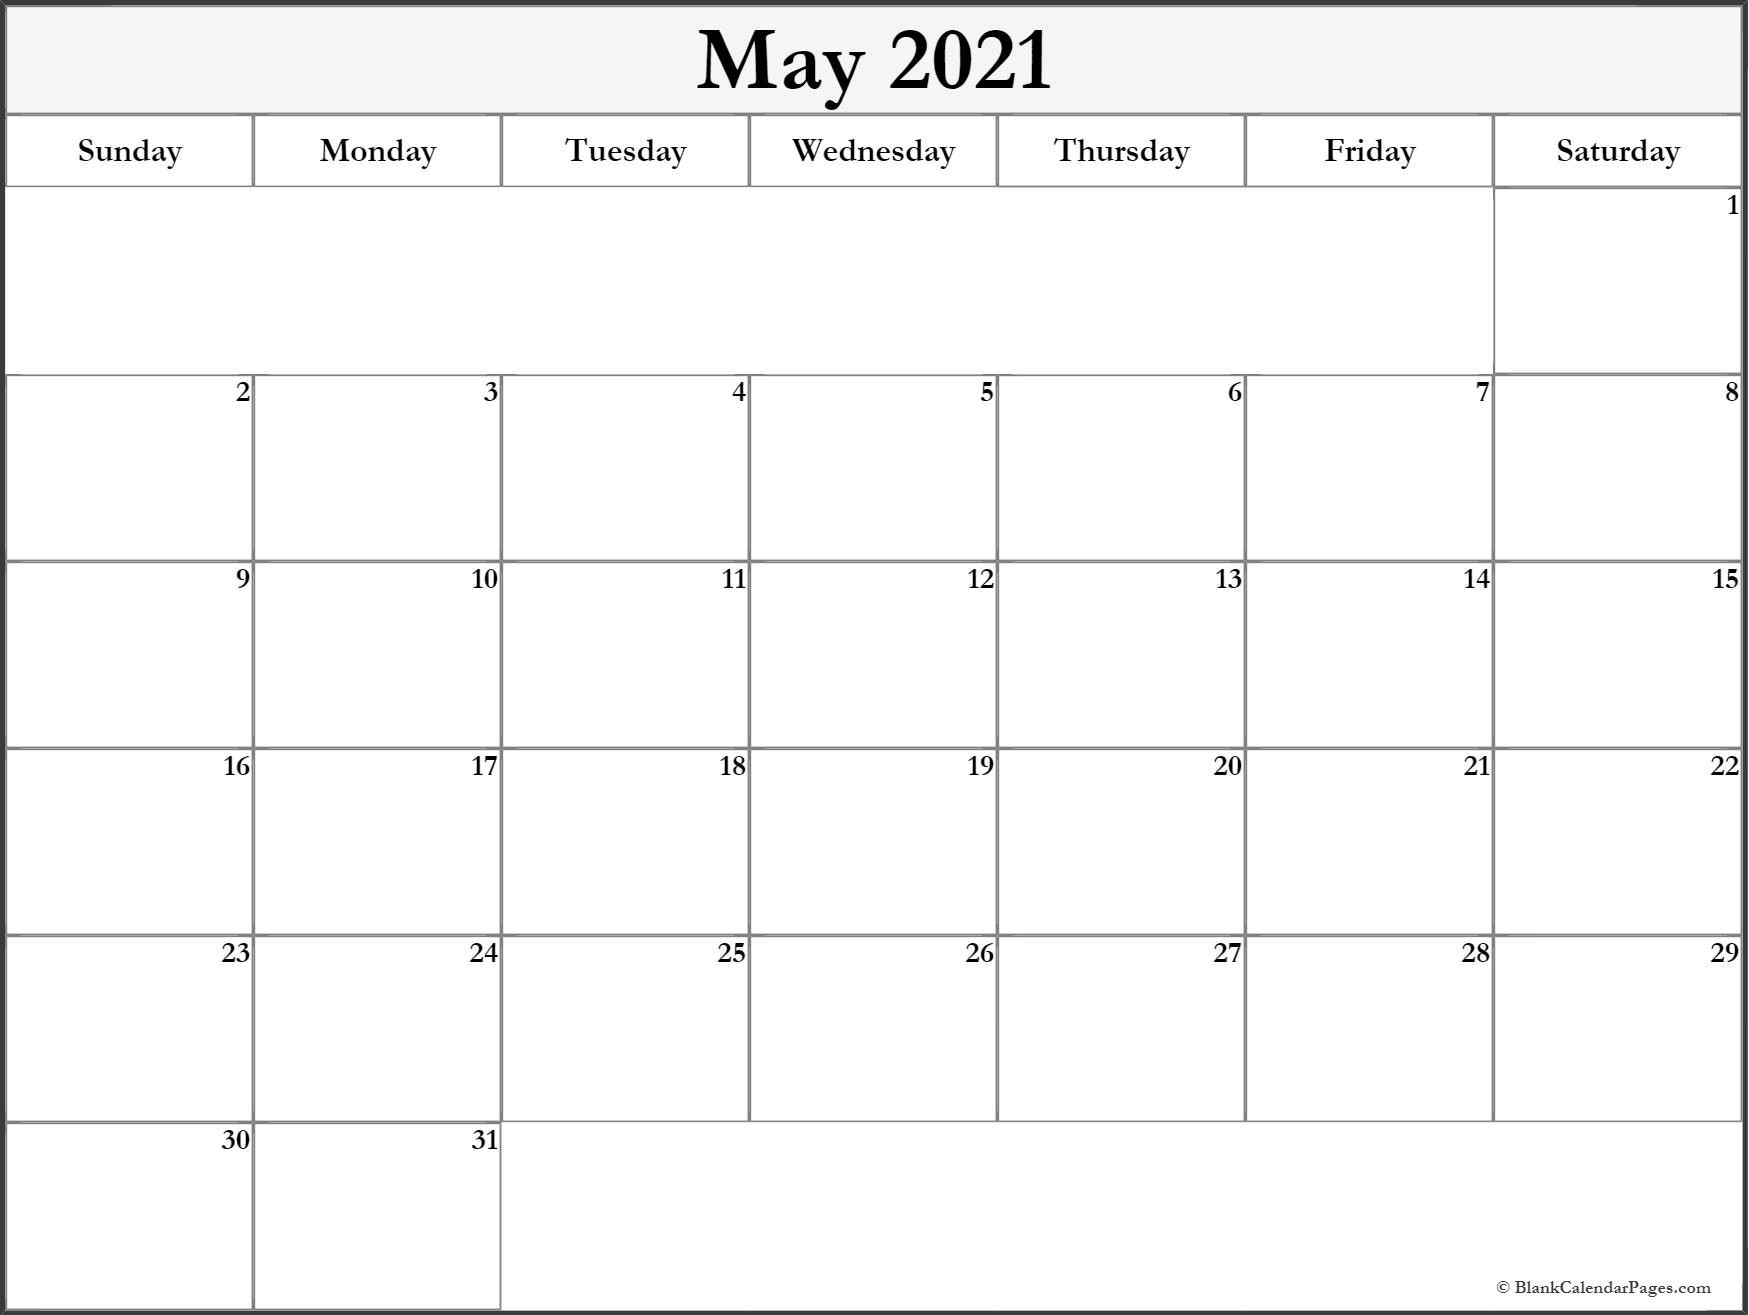 May 2021 Blank Calendar Templates.-Free Monthly May Calendar With Notes 2021